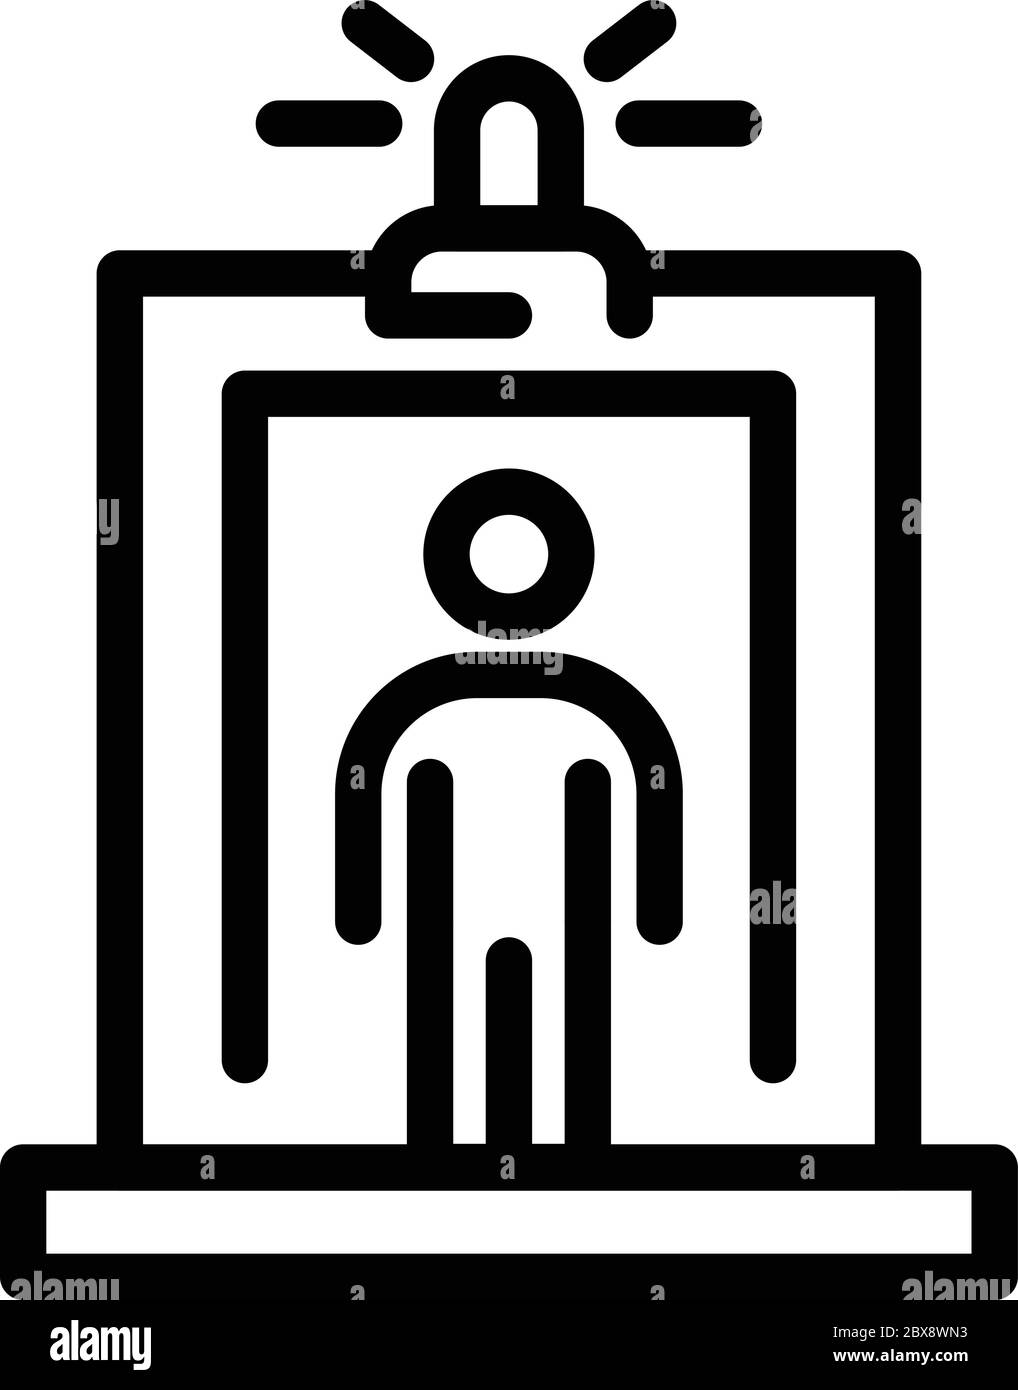 Flashlight metal detector icon, outline style Stock Vector